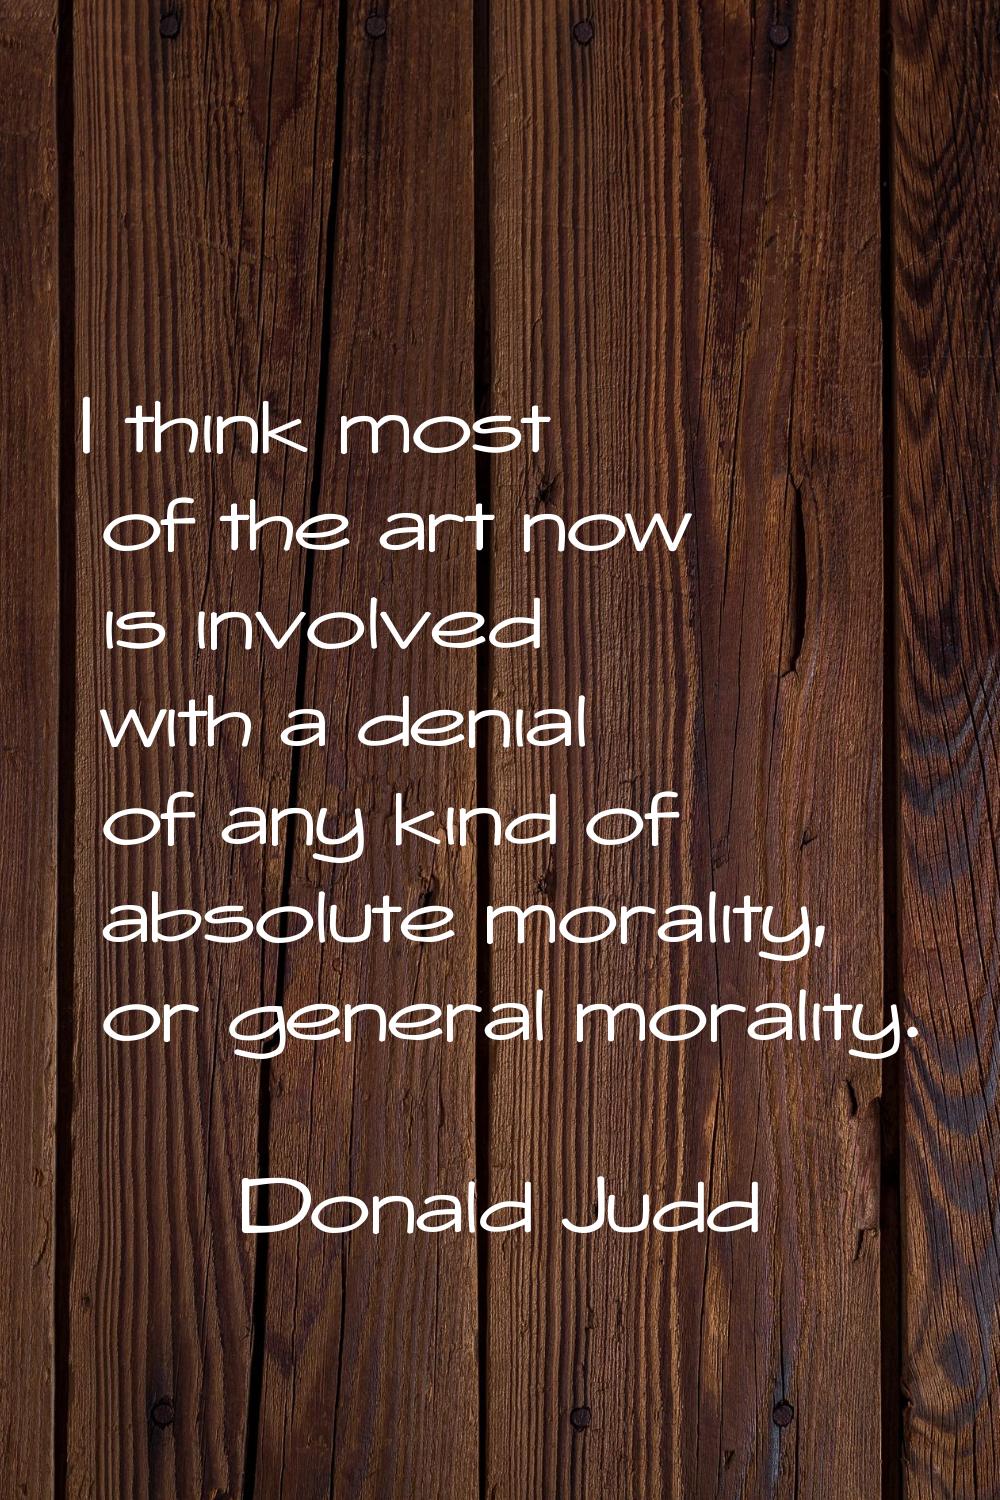 I think most of the art now is involved with a denial of any kind of absolute morality, or general 